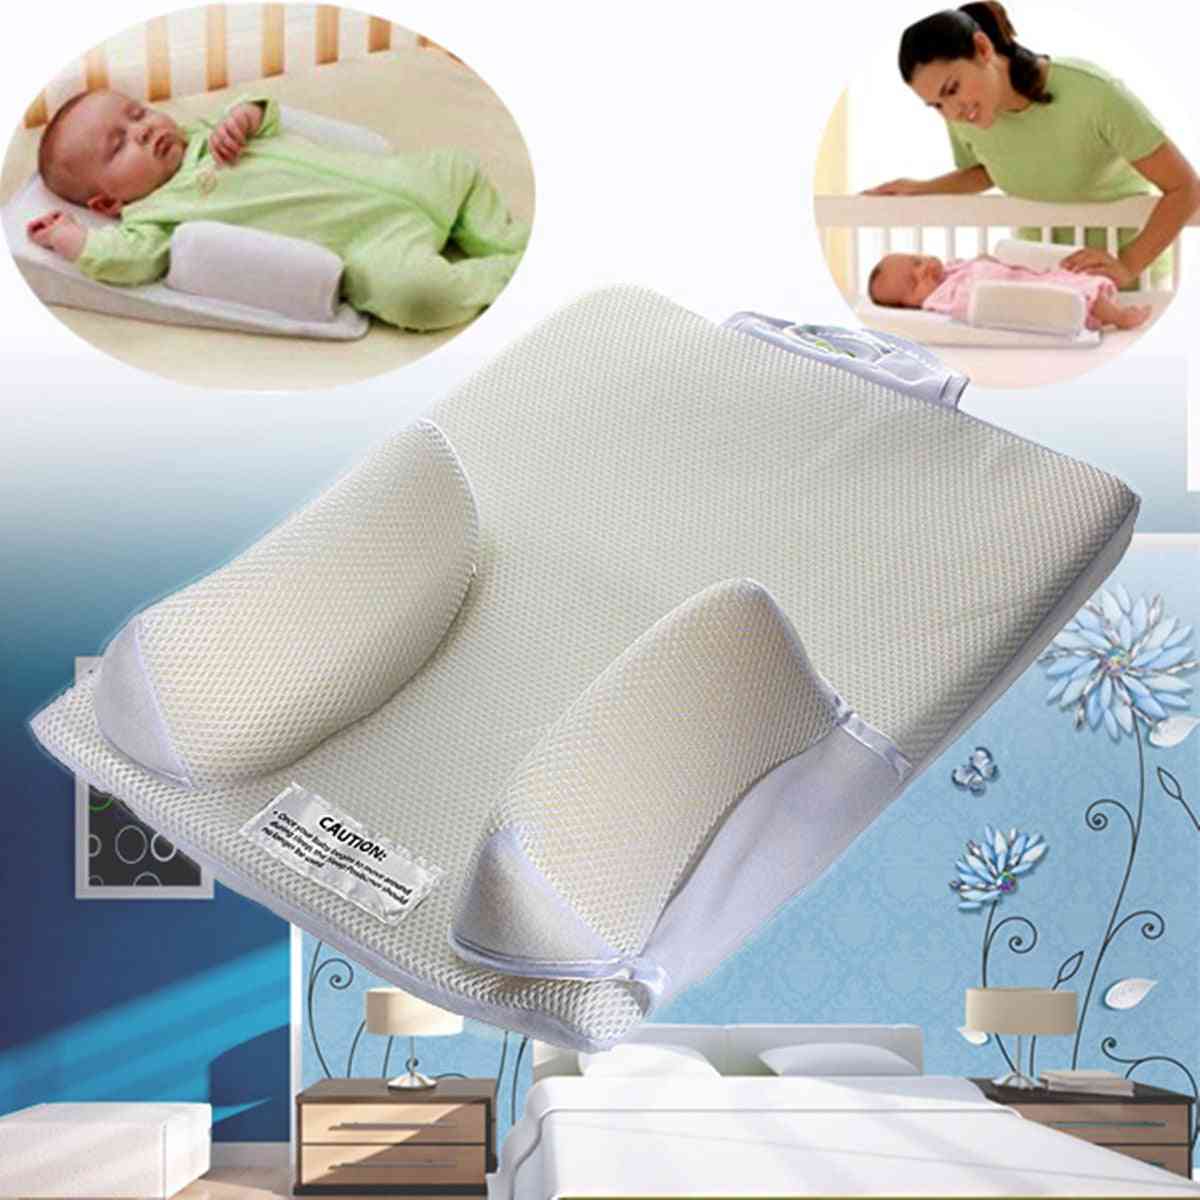 Sleep Positioner Pillow For Babies/infants